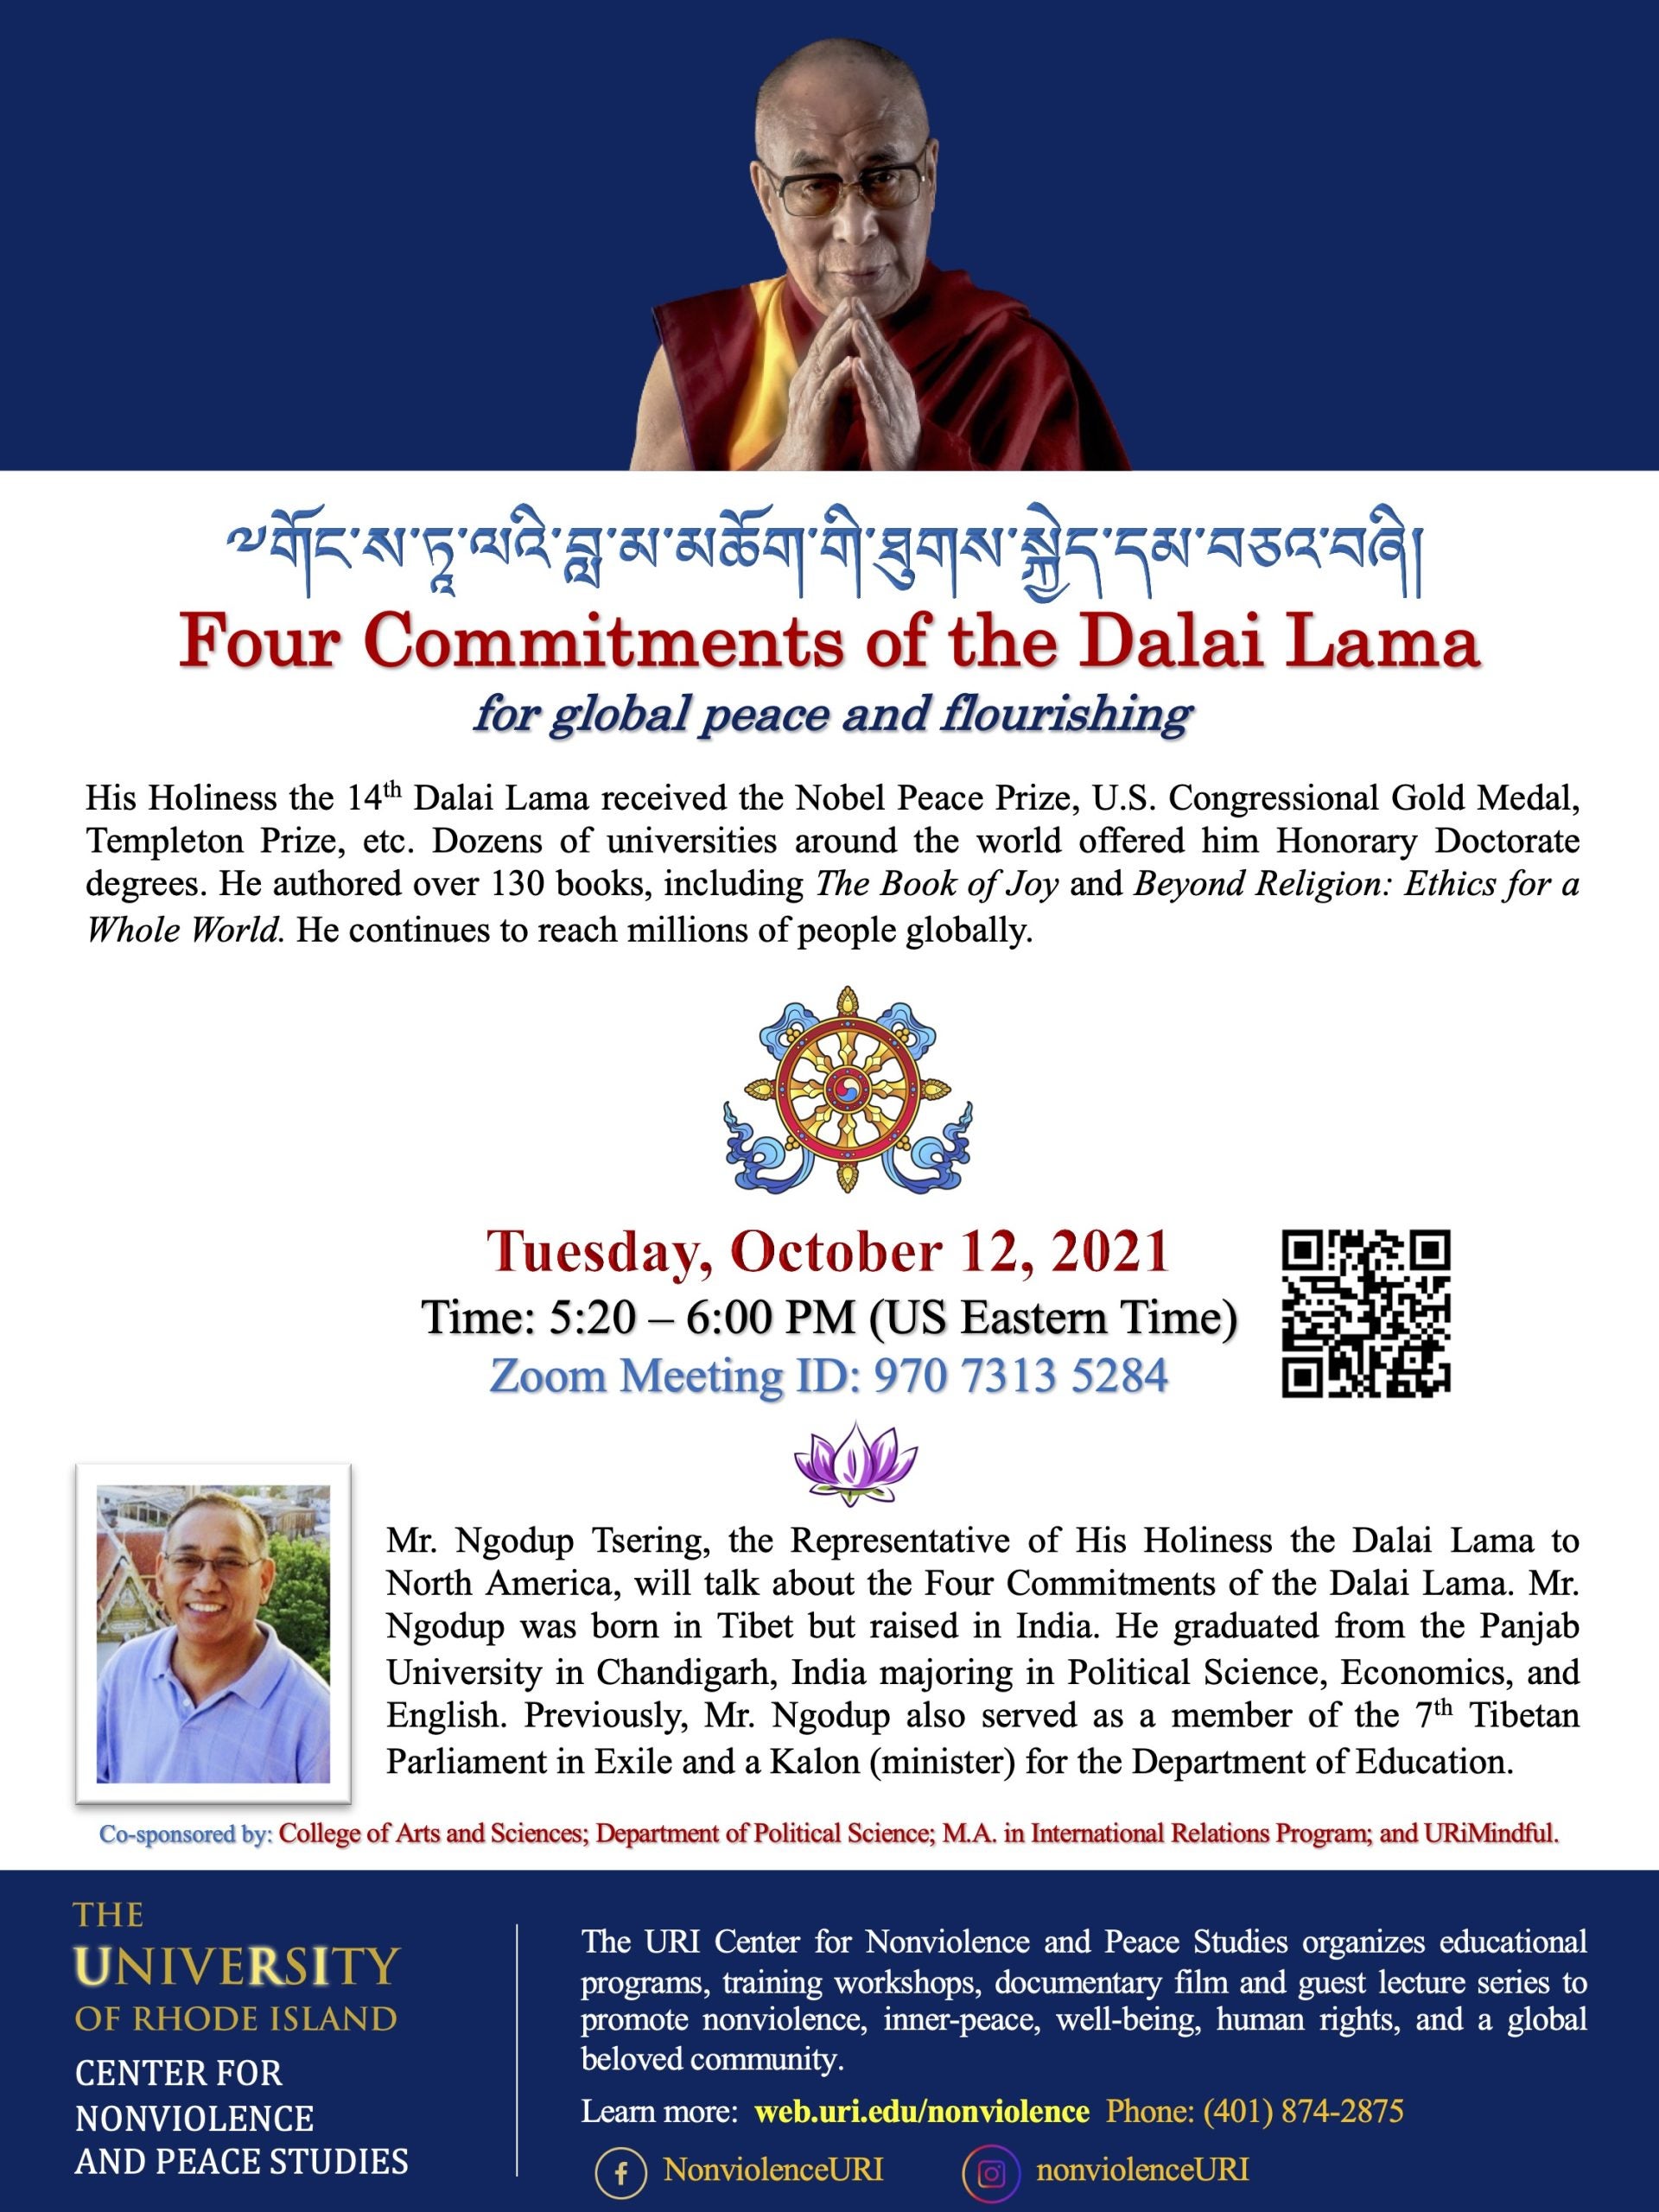 Mr. Ngodup Tsering, the Representative of His Holiness the Dalai Lama to North America, will talk about the Four Commitments of the Dalai Lama. Date: Tues Oct 12, 2021 5:20pm – 6:00pm (EST)